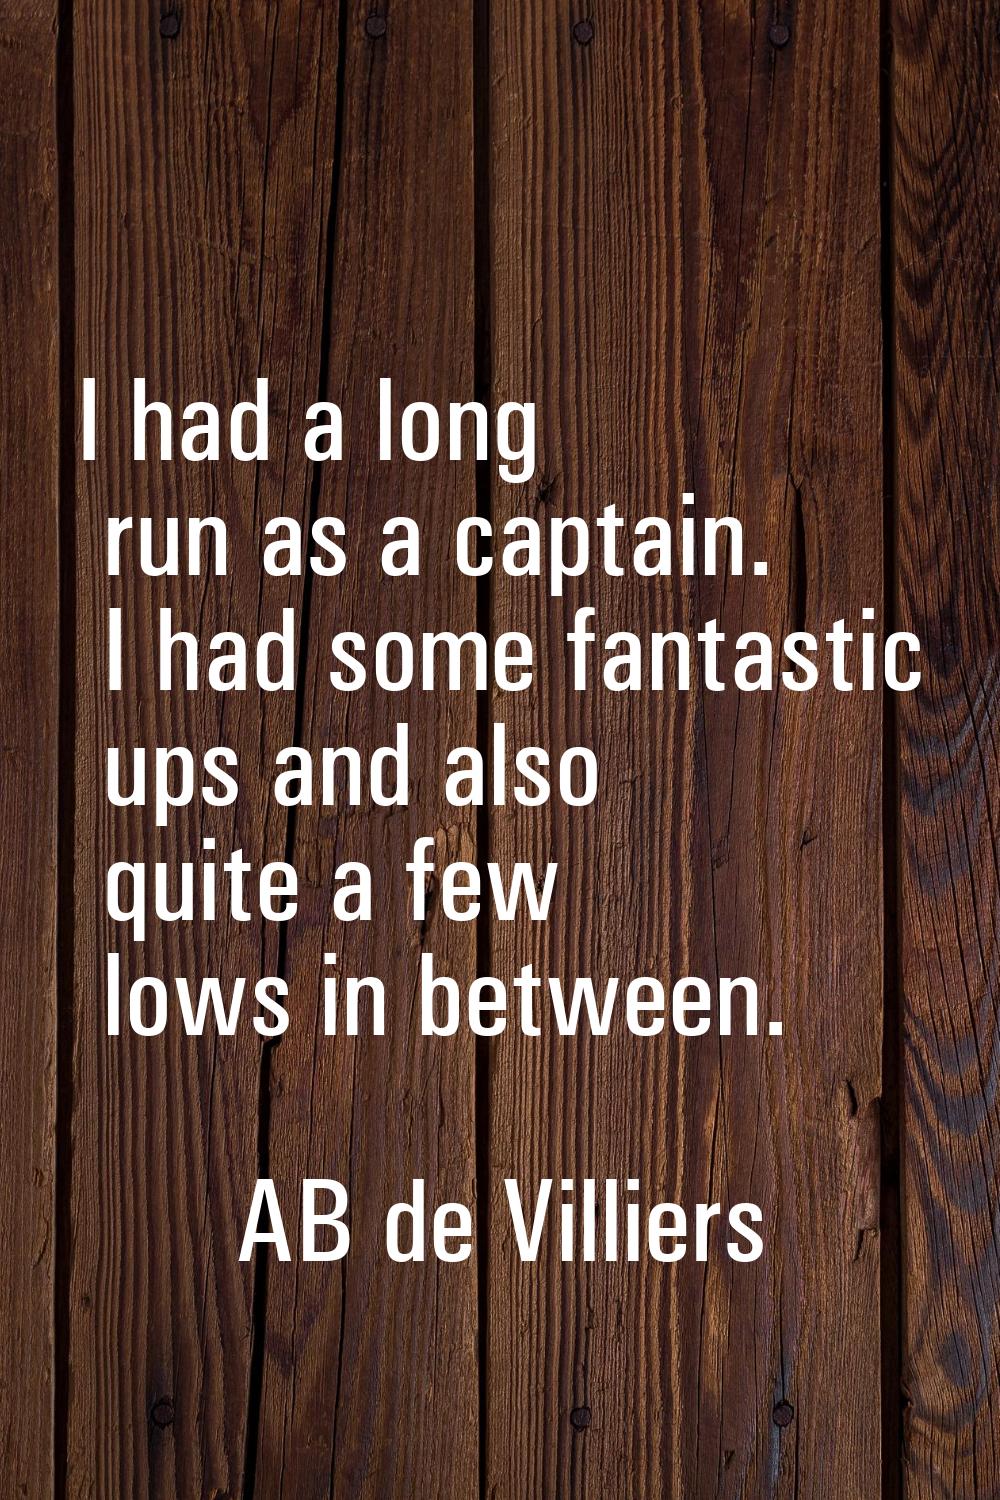 I had a long run as a captain. I had some fantastic ups and also quite a few lows in between.